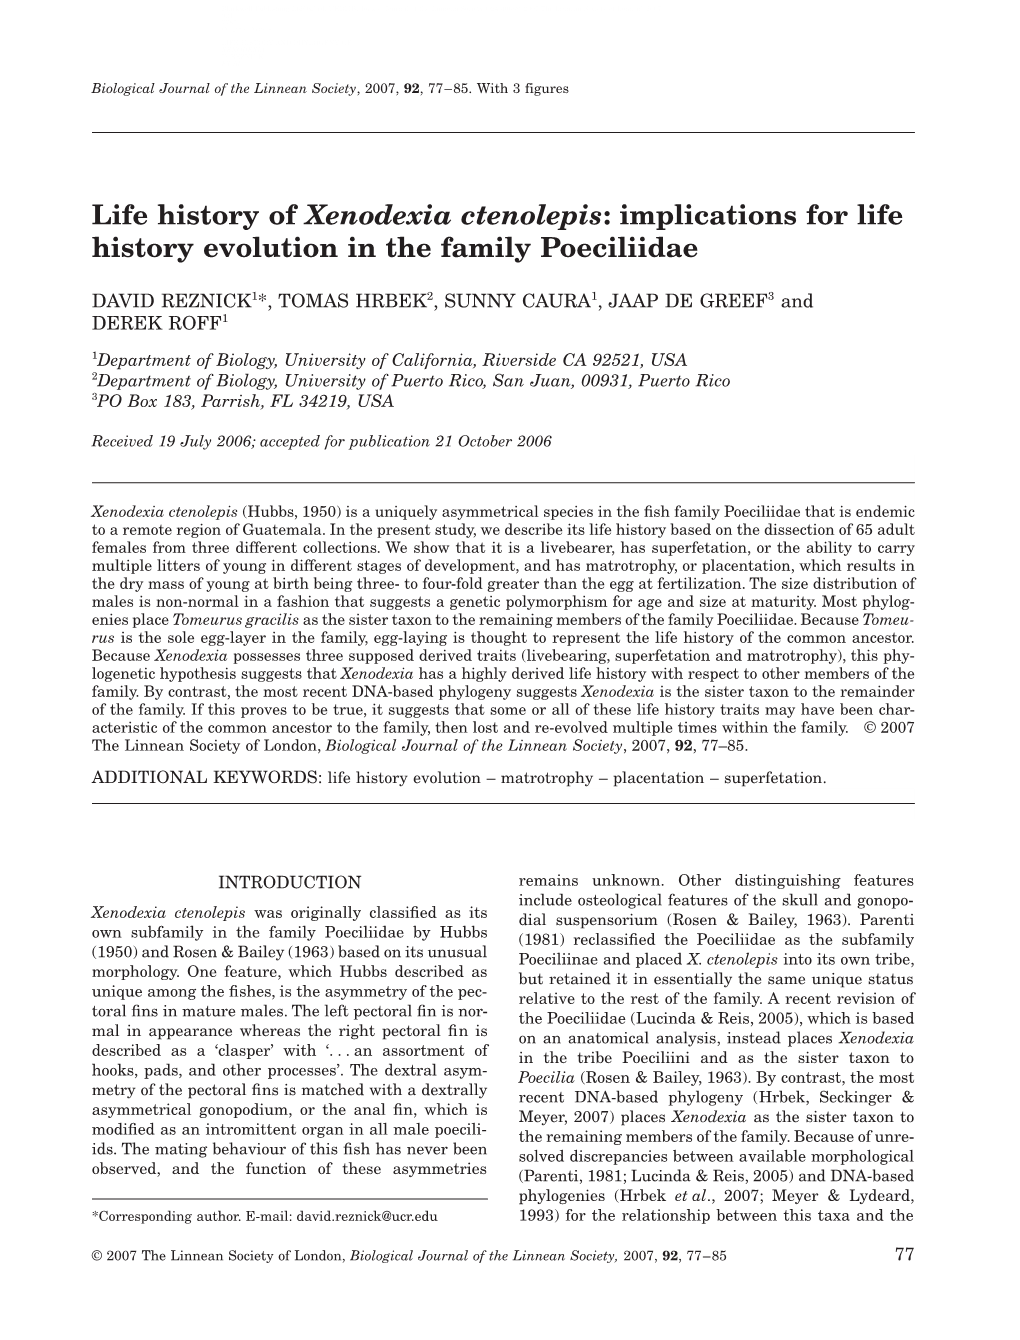 Implications for Life History Evolution in the Family Poeciliidae